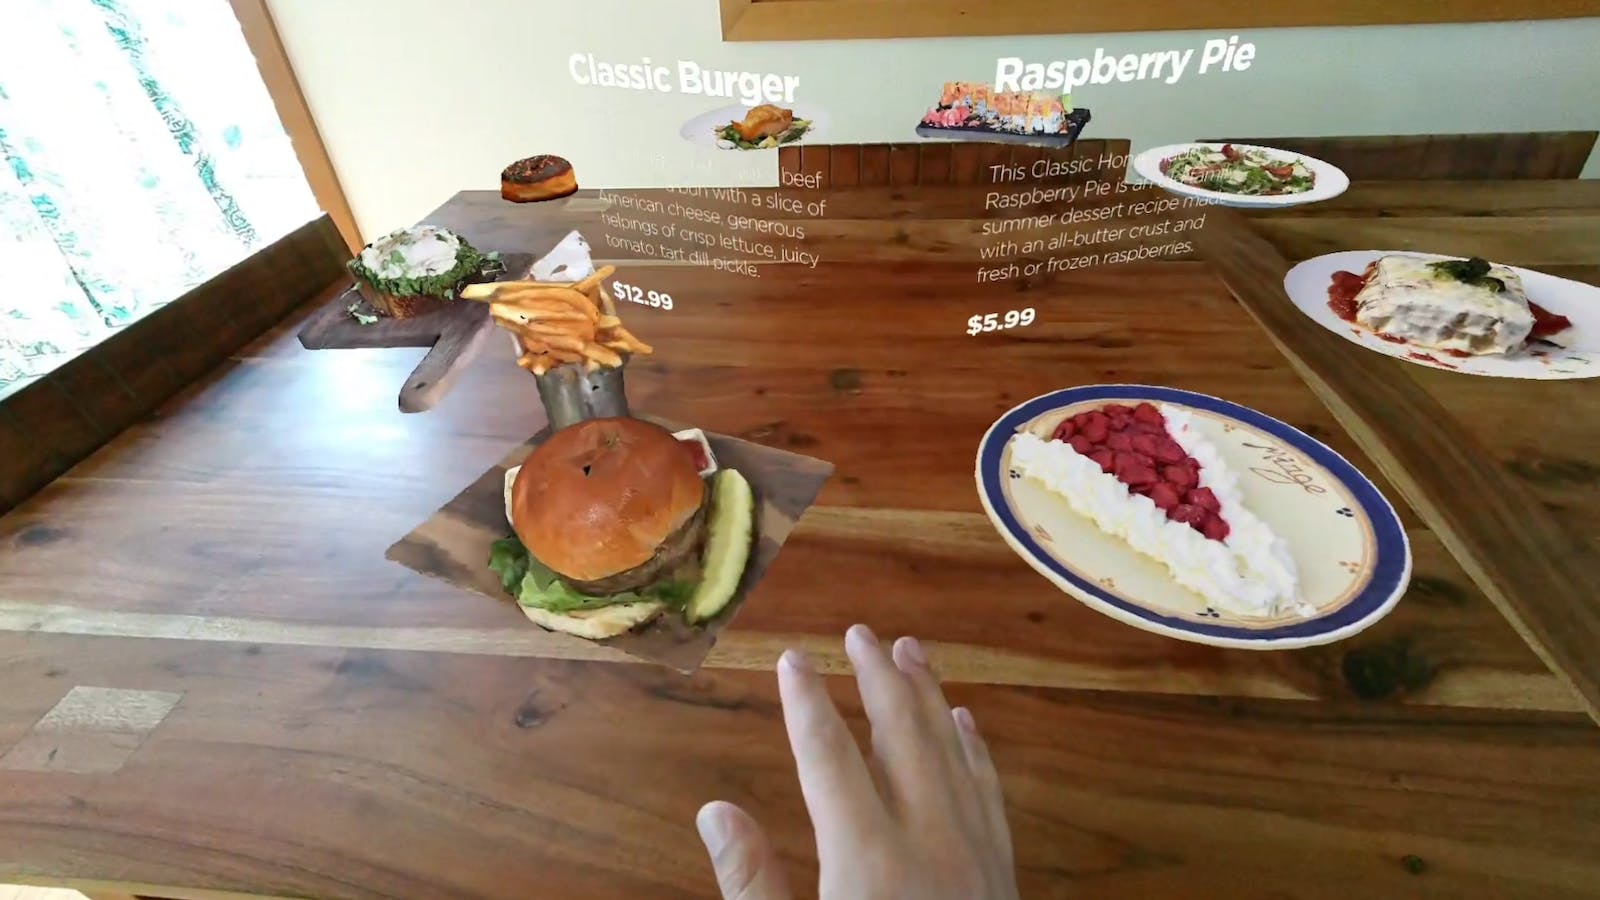 An AR menu demo made for Snap's Spectacles by developer Brielle Garcia. Photo: Snap